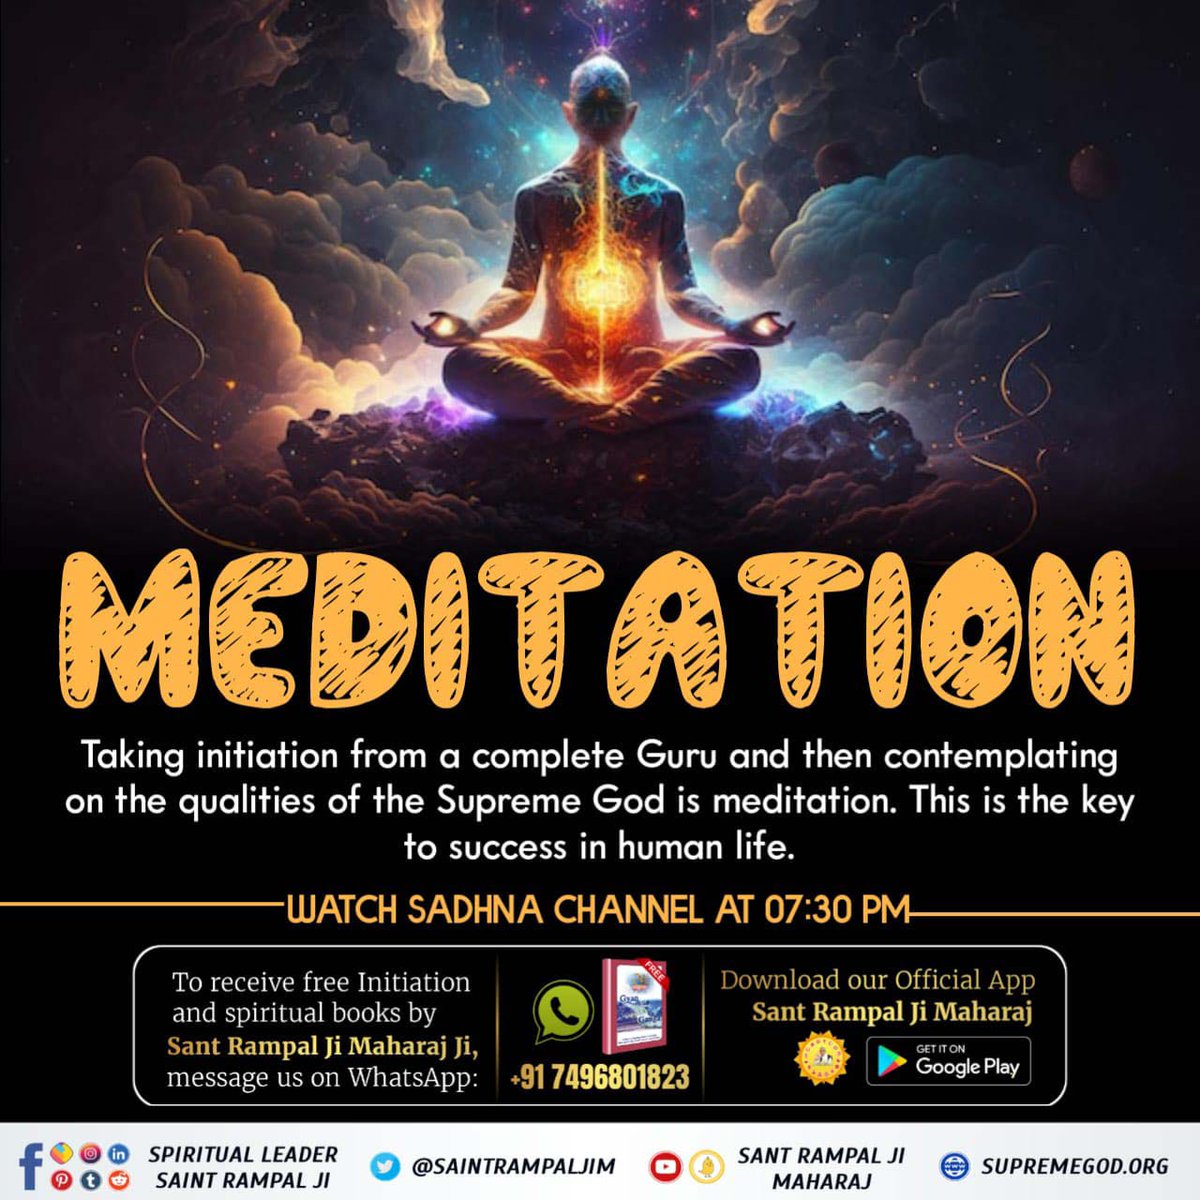 #What_Is_Meditation

True meditation goes beyond mere techniques; it is about connecting with the divine through sincere devotion. Initiate your spiritual journey under the guidance of Sant Rampal Ji Maharaj Ji, a true guru who leads seekers to true meditation.